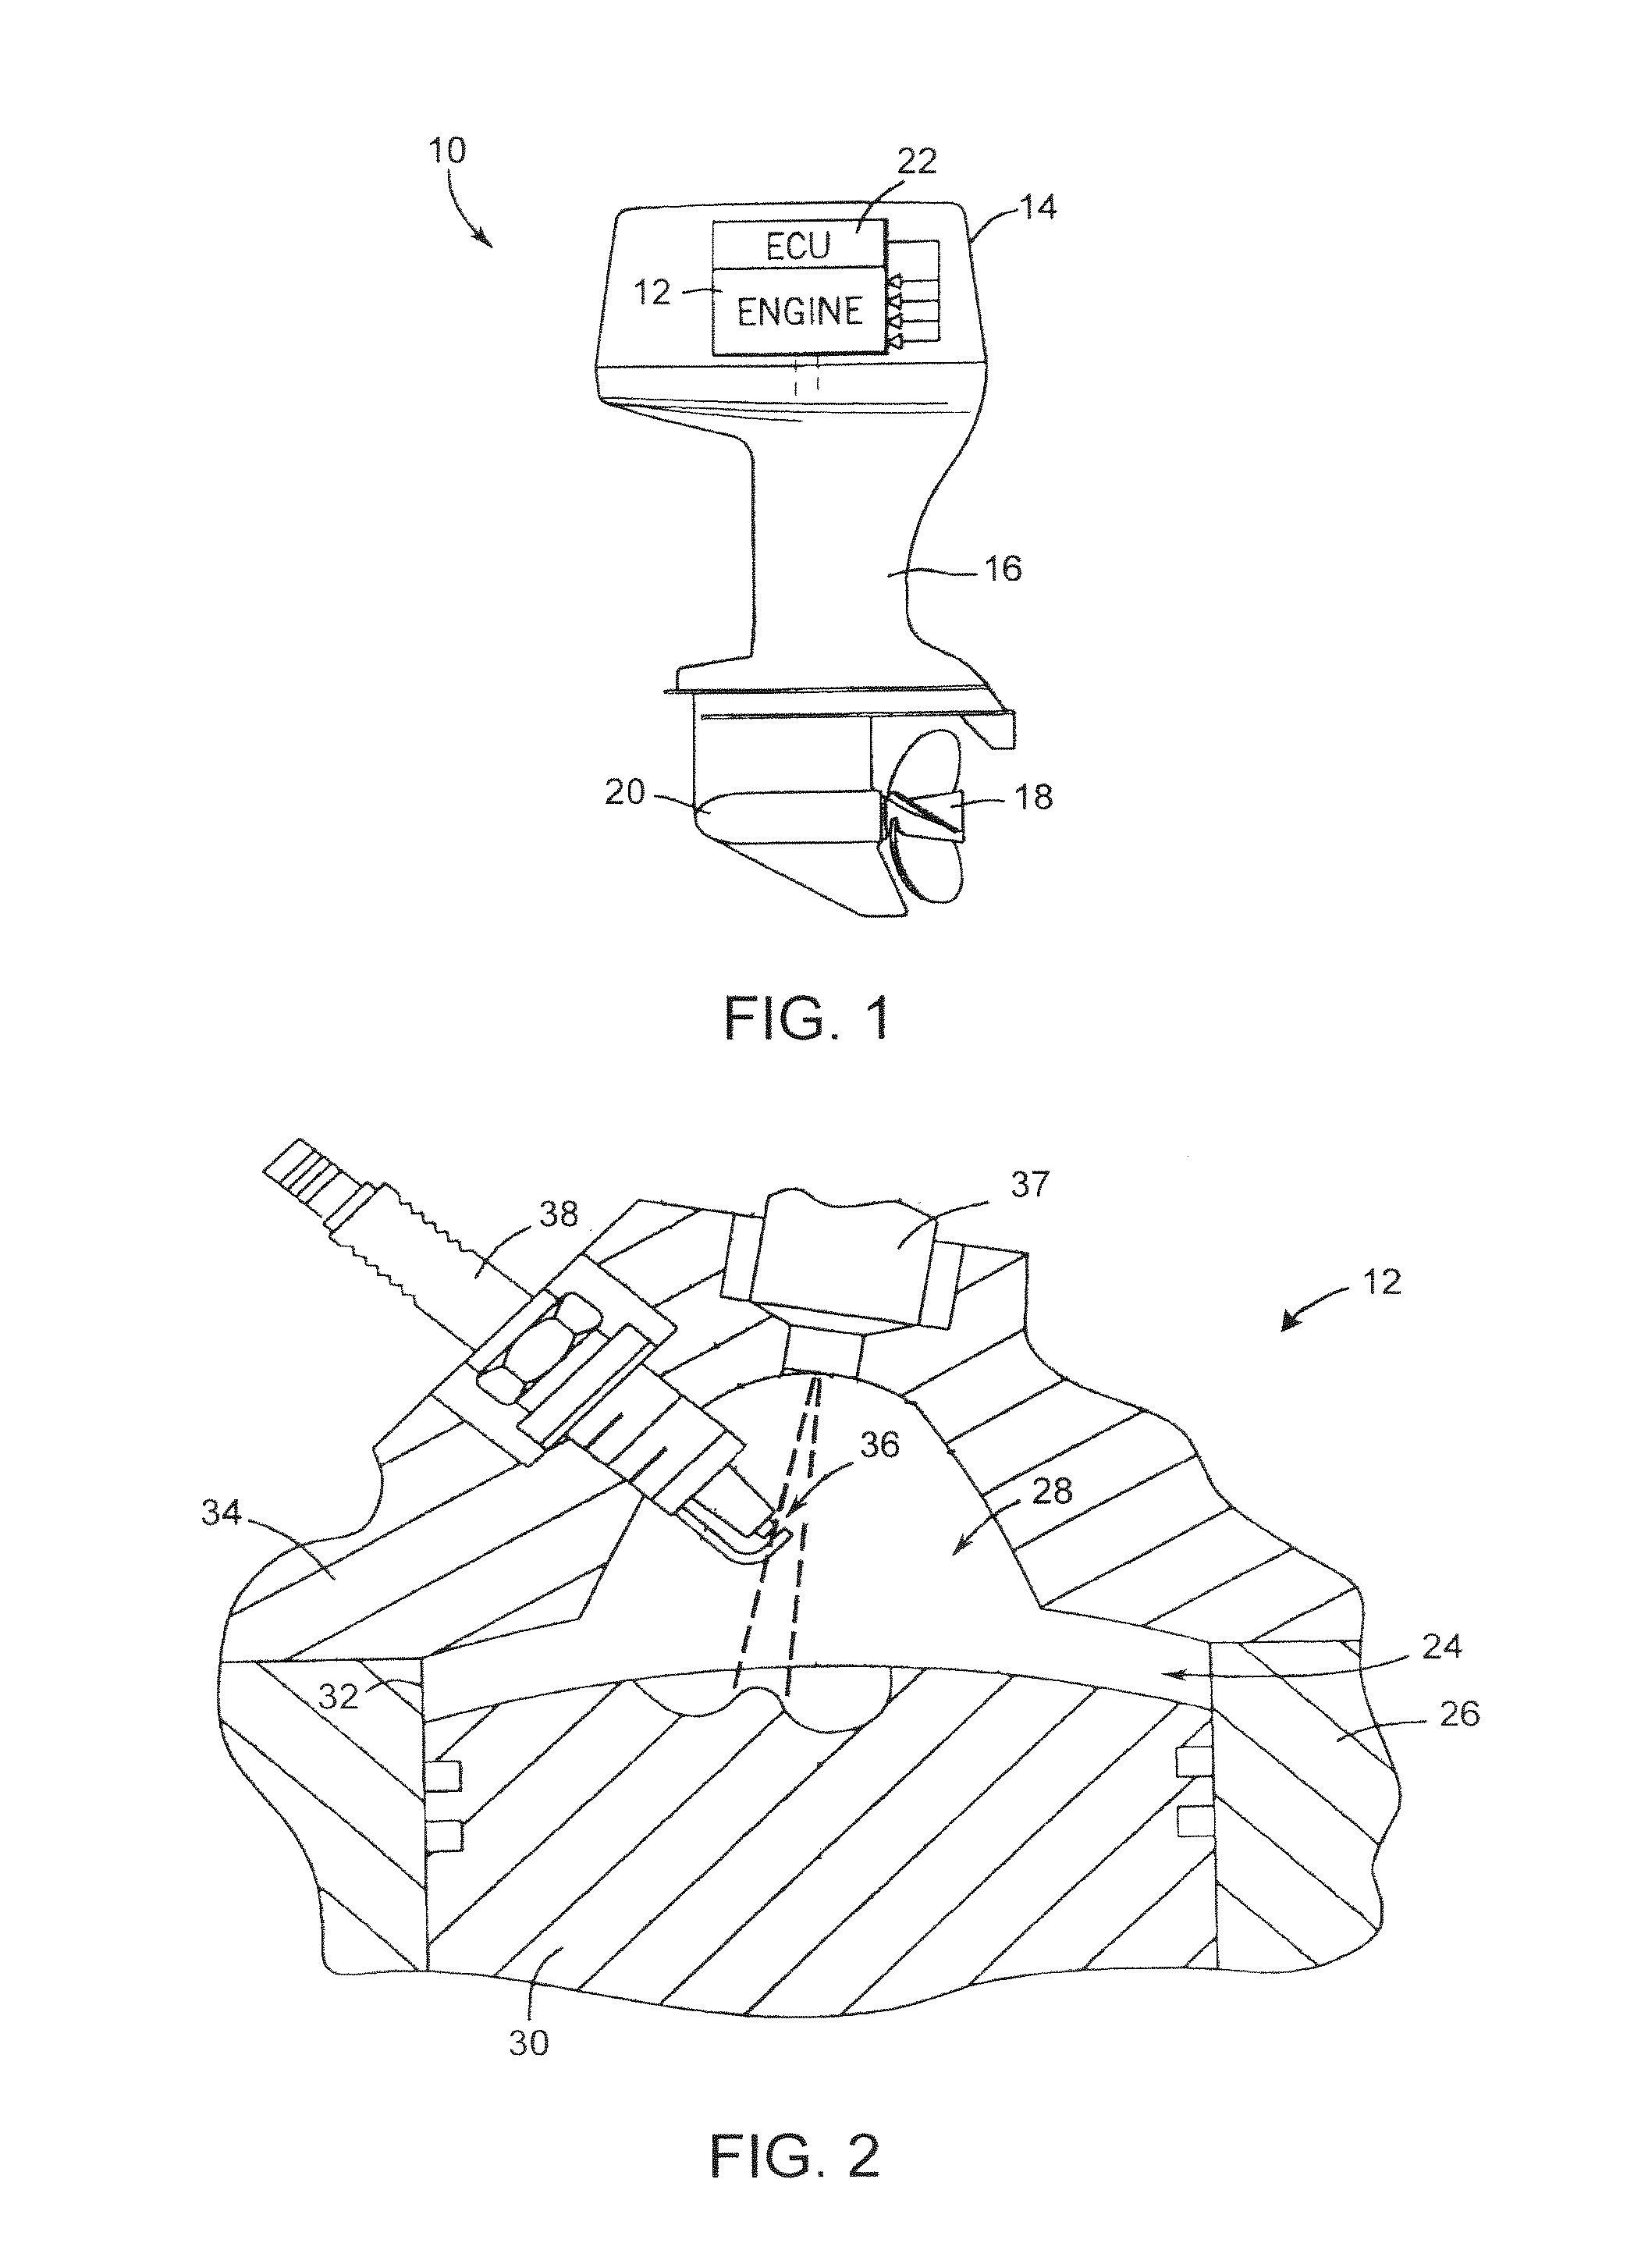 System and method to detect and correct spark plug fouling in a marine engine